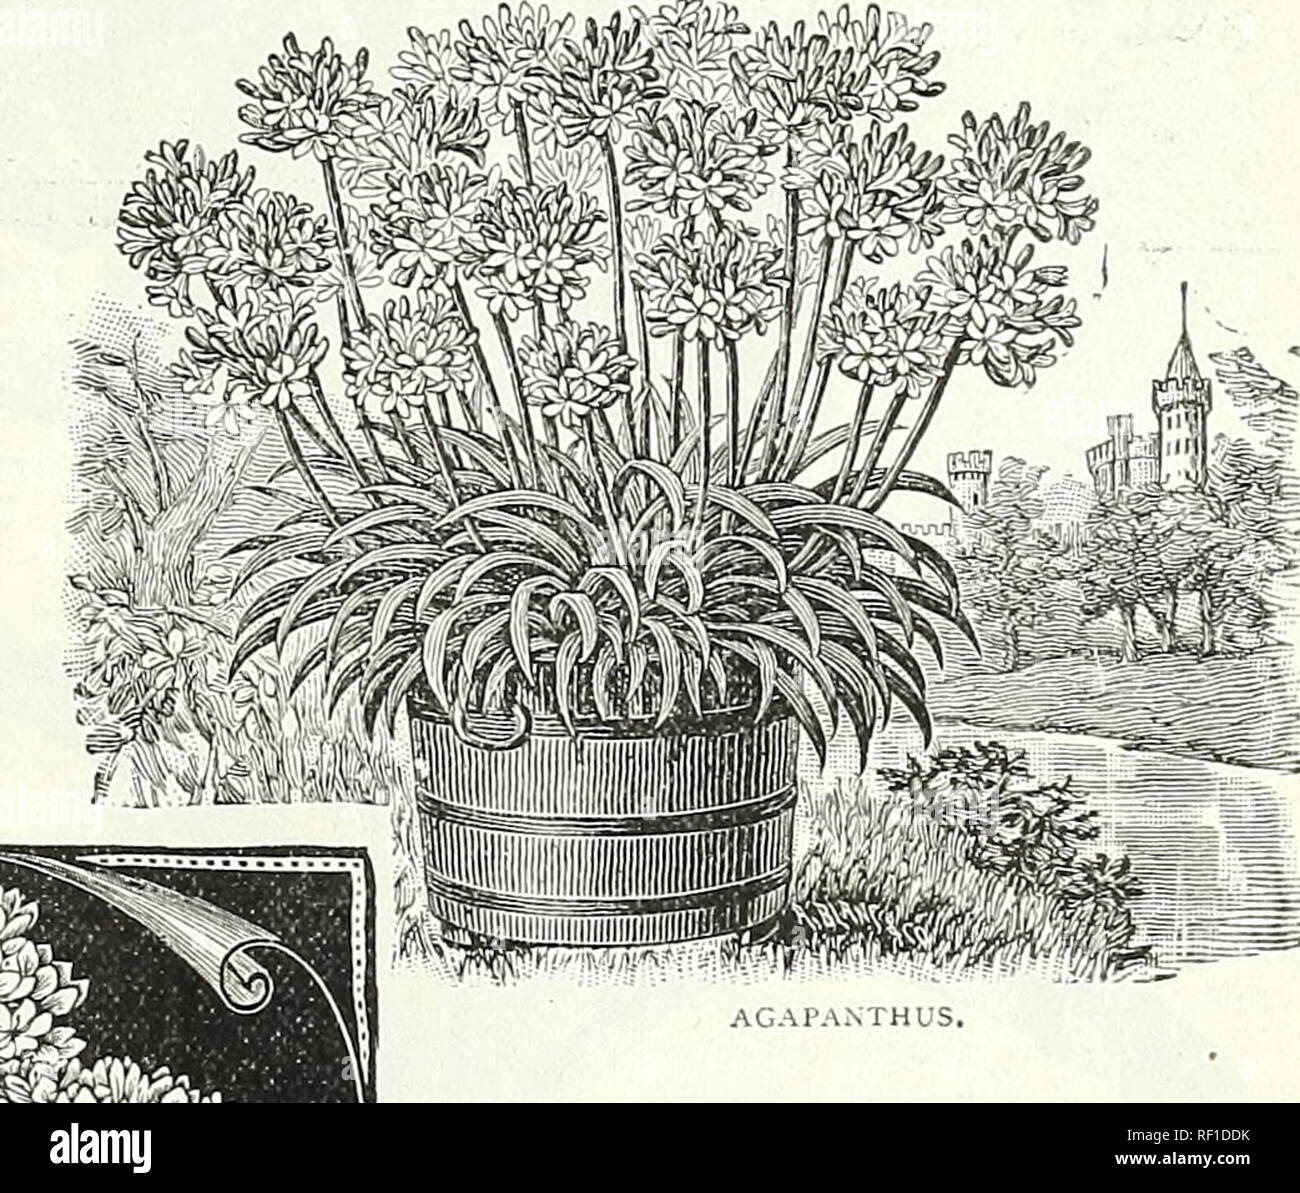 . Catalogue of bulbs, plants and seeds for autumn planting. : 1895. Seed industry and trade Catalogs; Vegetables Seeds Catalogs; Flowers Seeds Catalogs; Grasses Seeds Catalogs. ALSTROMERIA. Peruvian Lilies. Tuberous-rooted plants, robust and abu-dant blooming, with beauLifut, large, lily-like flowers of great beauty, borne ia clusters during the summer ; colors, crimson, rose, yellow, purple, etc., shaded and marked. They are splendid for cutting, being of much substance and lasting in perfection for a long lime. Splendid subjects for either pot culture or for planting out in frames, 2 to 4 fe Stock Photo